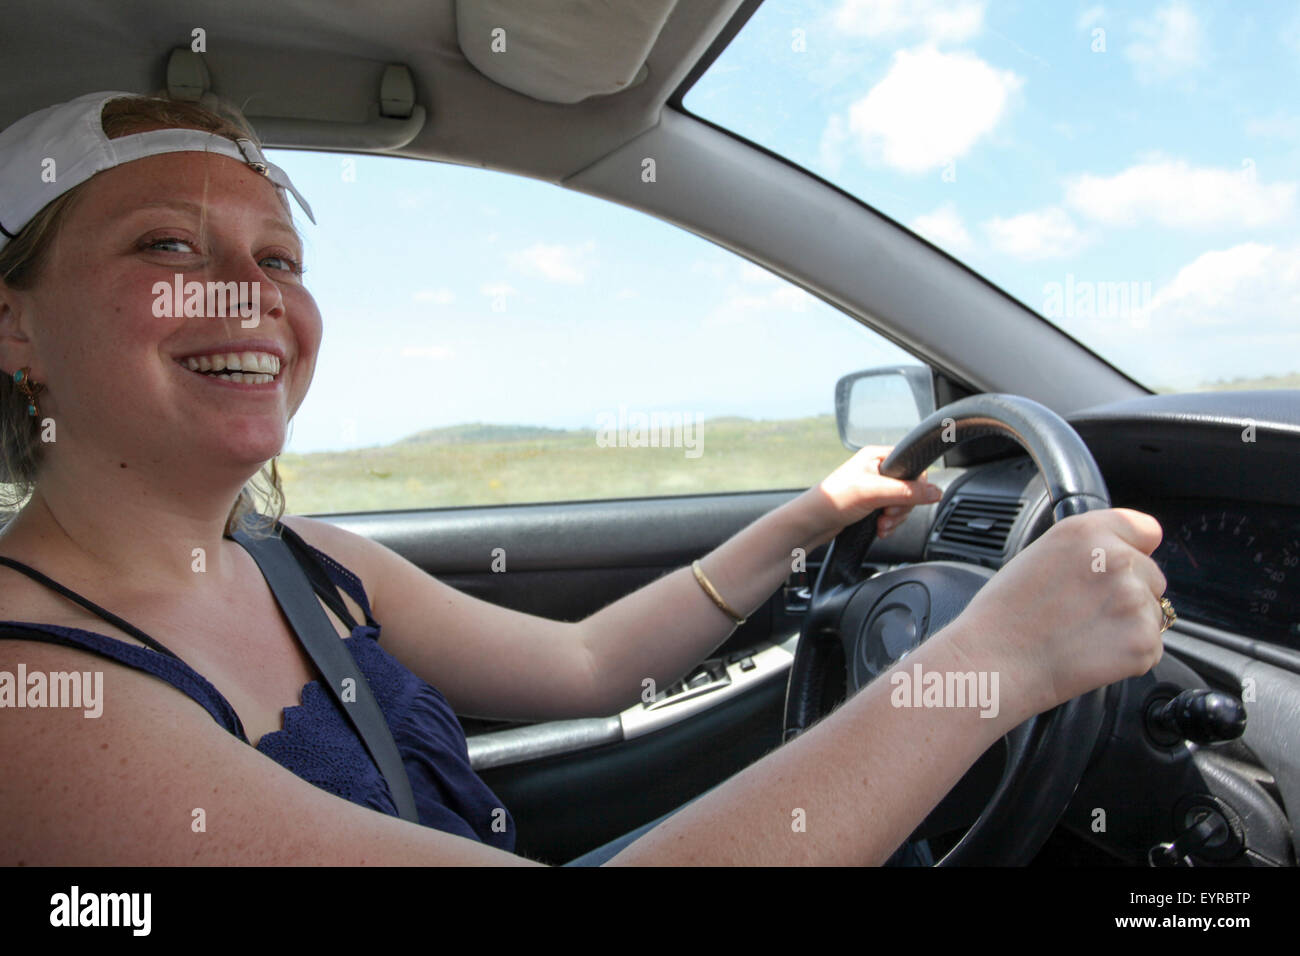 Young woman drives a car as seen from the passenger's seat Model release available Stock Photo